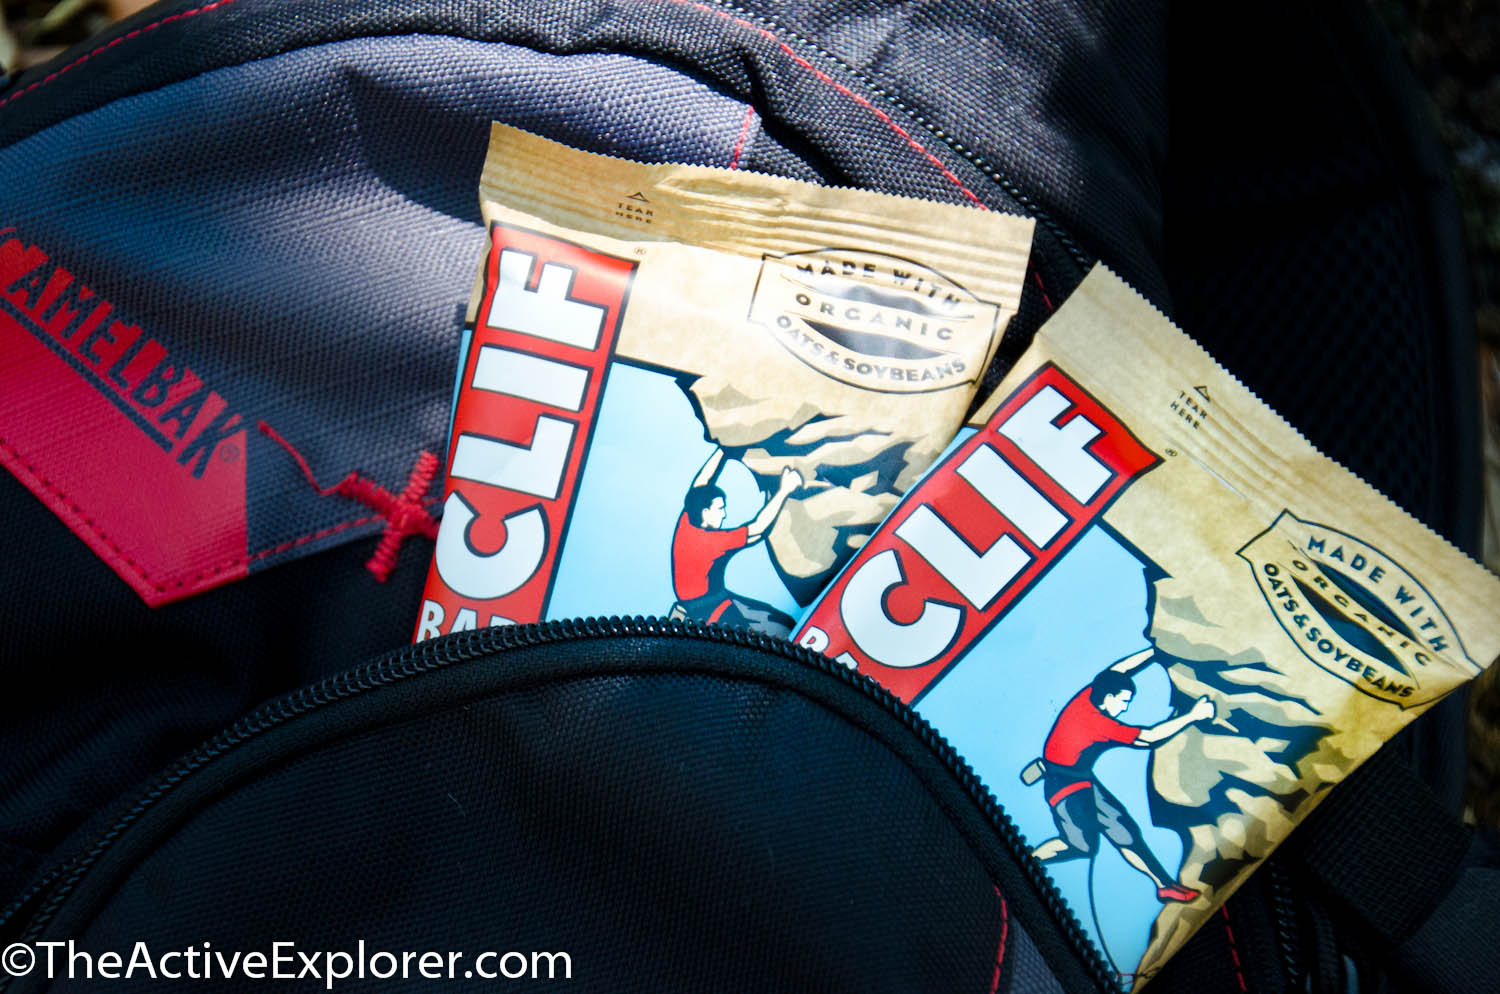 Clif Bars in my pack